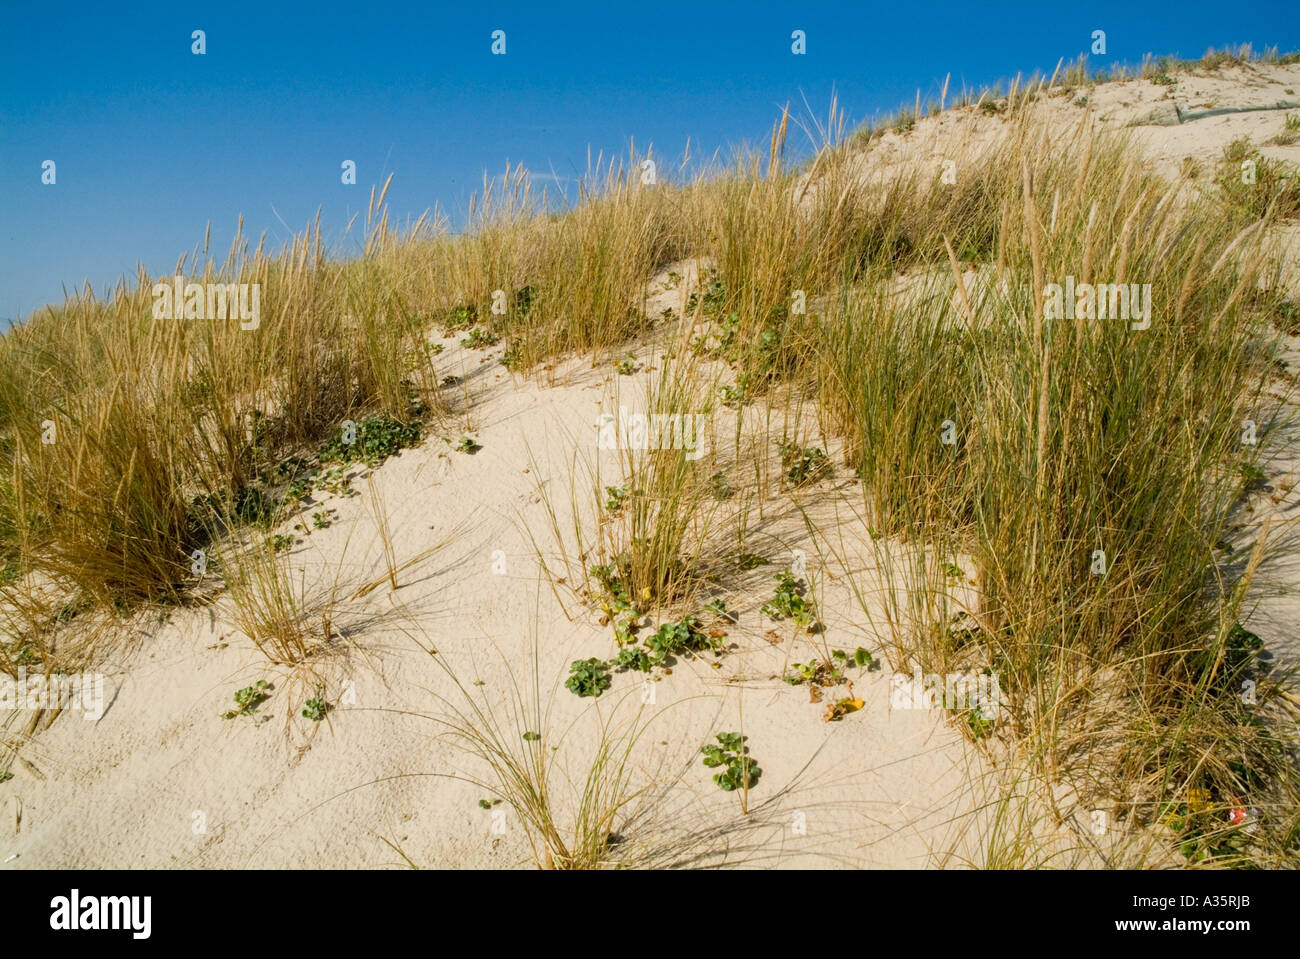 Grass growing in the Sand dunes at Le Porge plage in France Stock Photo